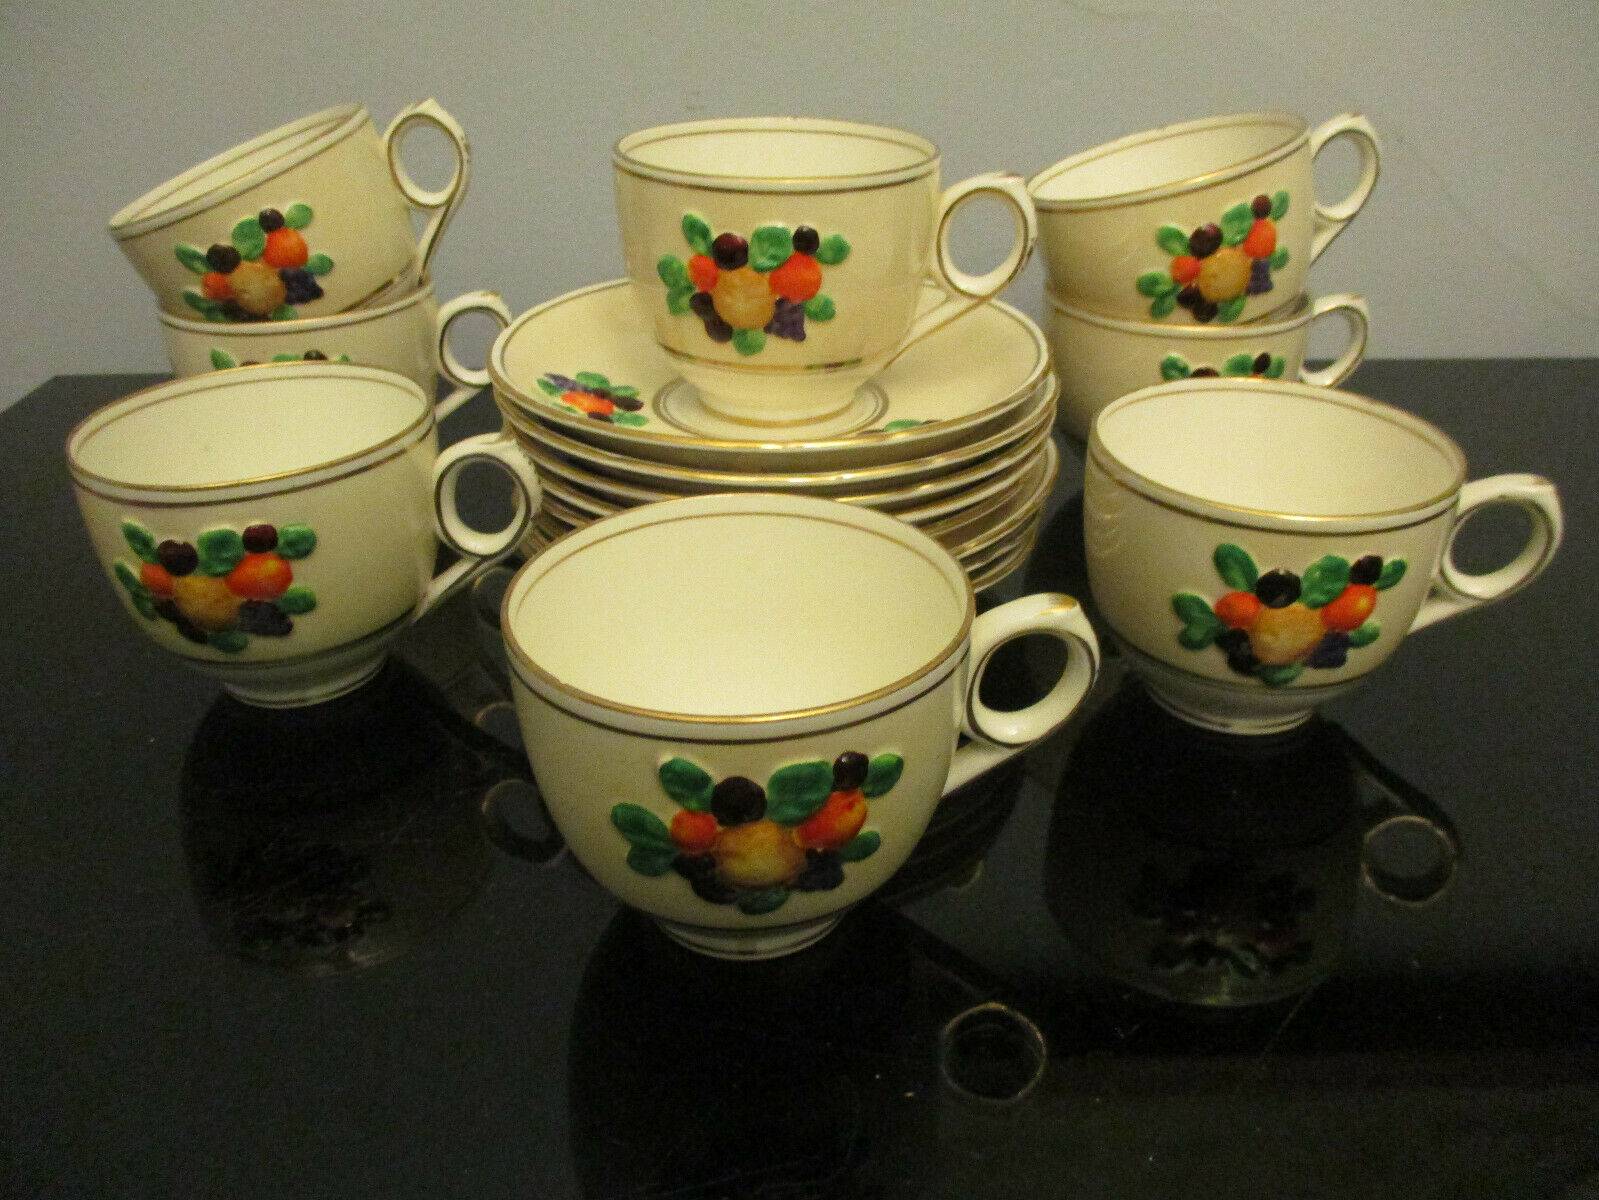 8 Antique Booths China Della Robbia Harvest Embossed Fruit Gold Cups Saucers